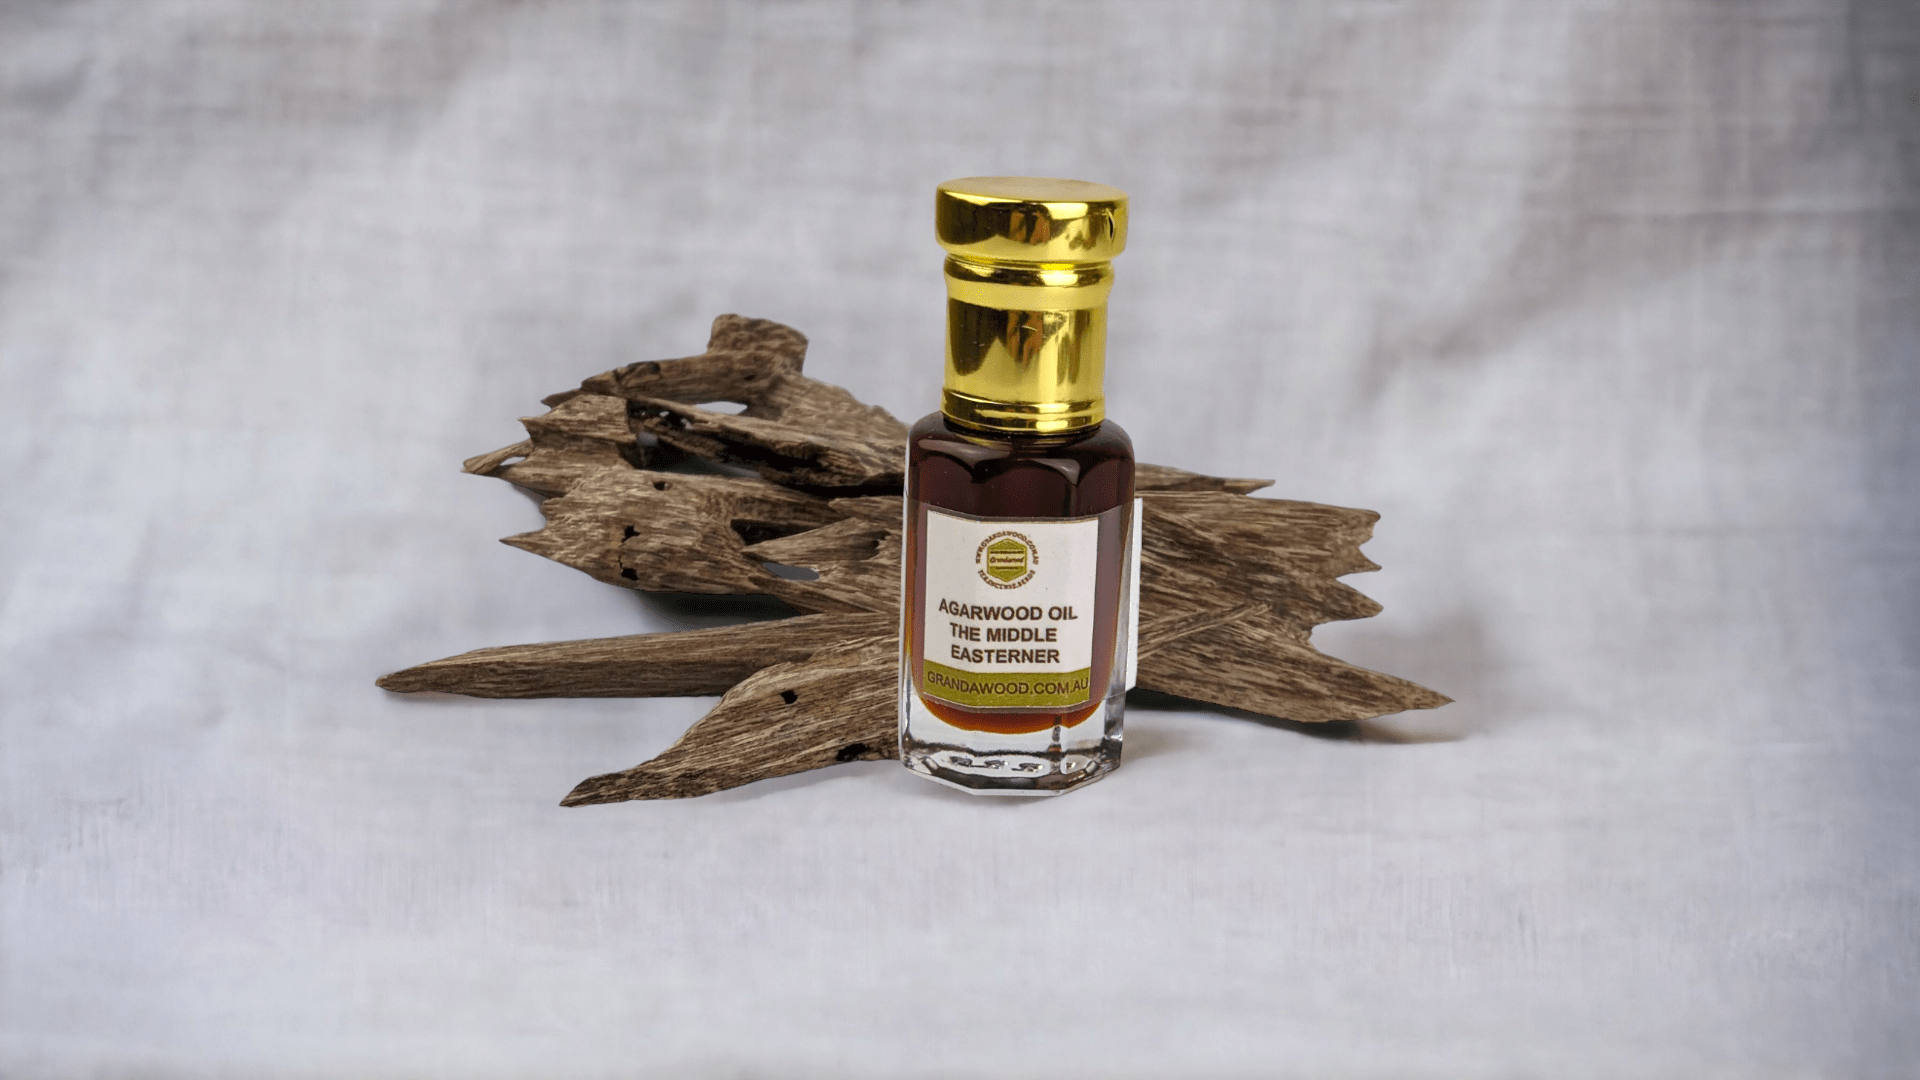 100% Pure Cultivated Agarwood Oil (Oud) Specialty- The Middle Easterner - 6ml